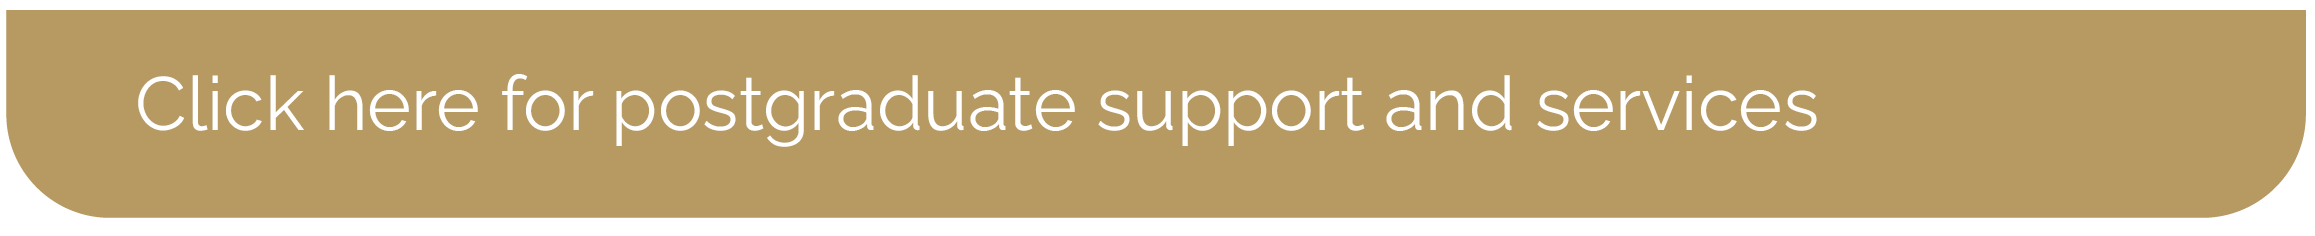 Postgraduate support and services_2023_1.png